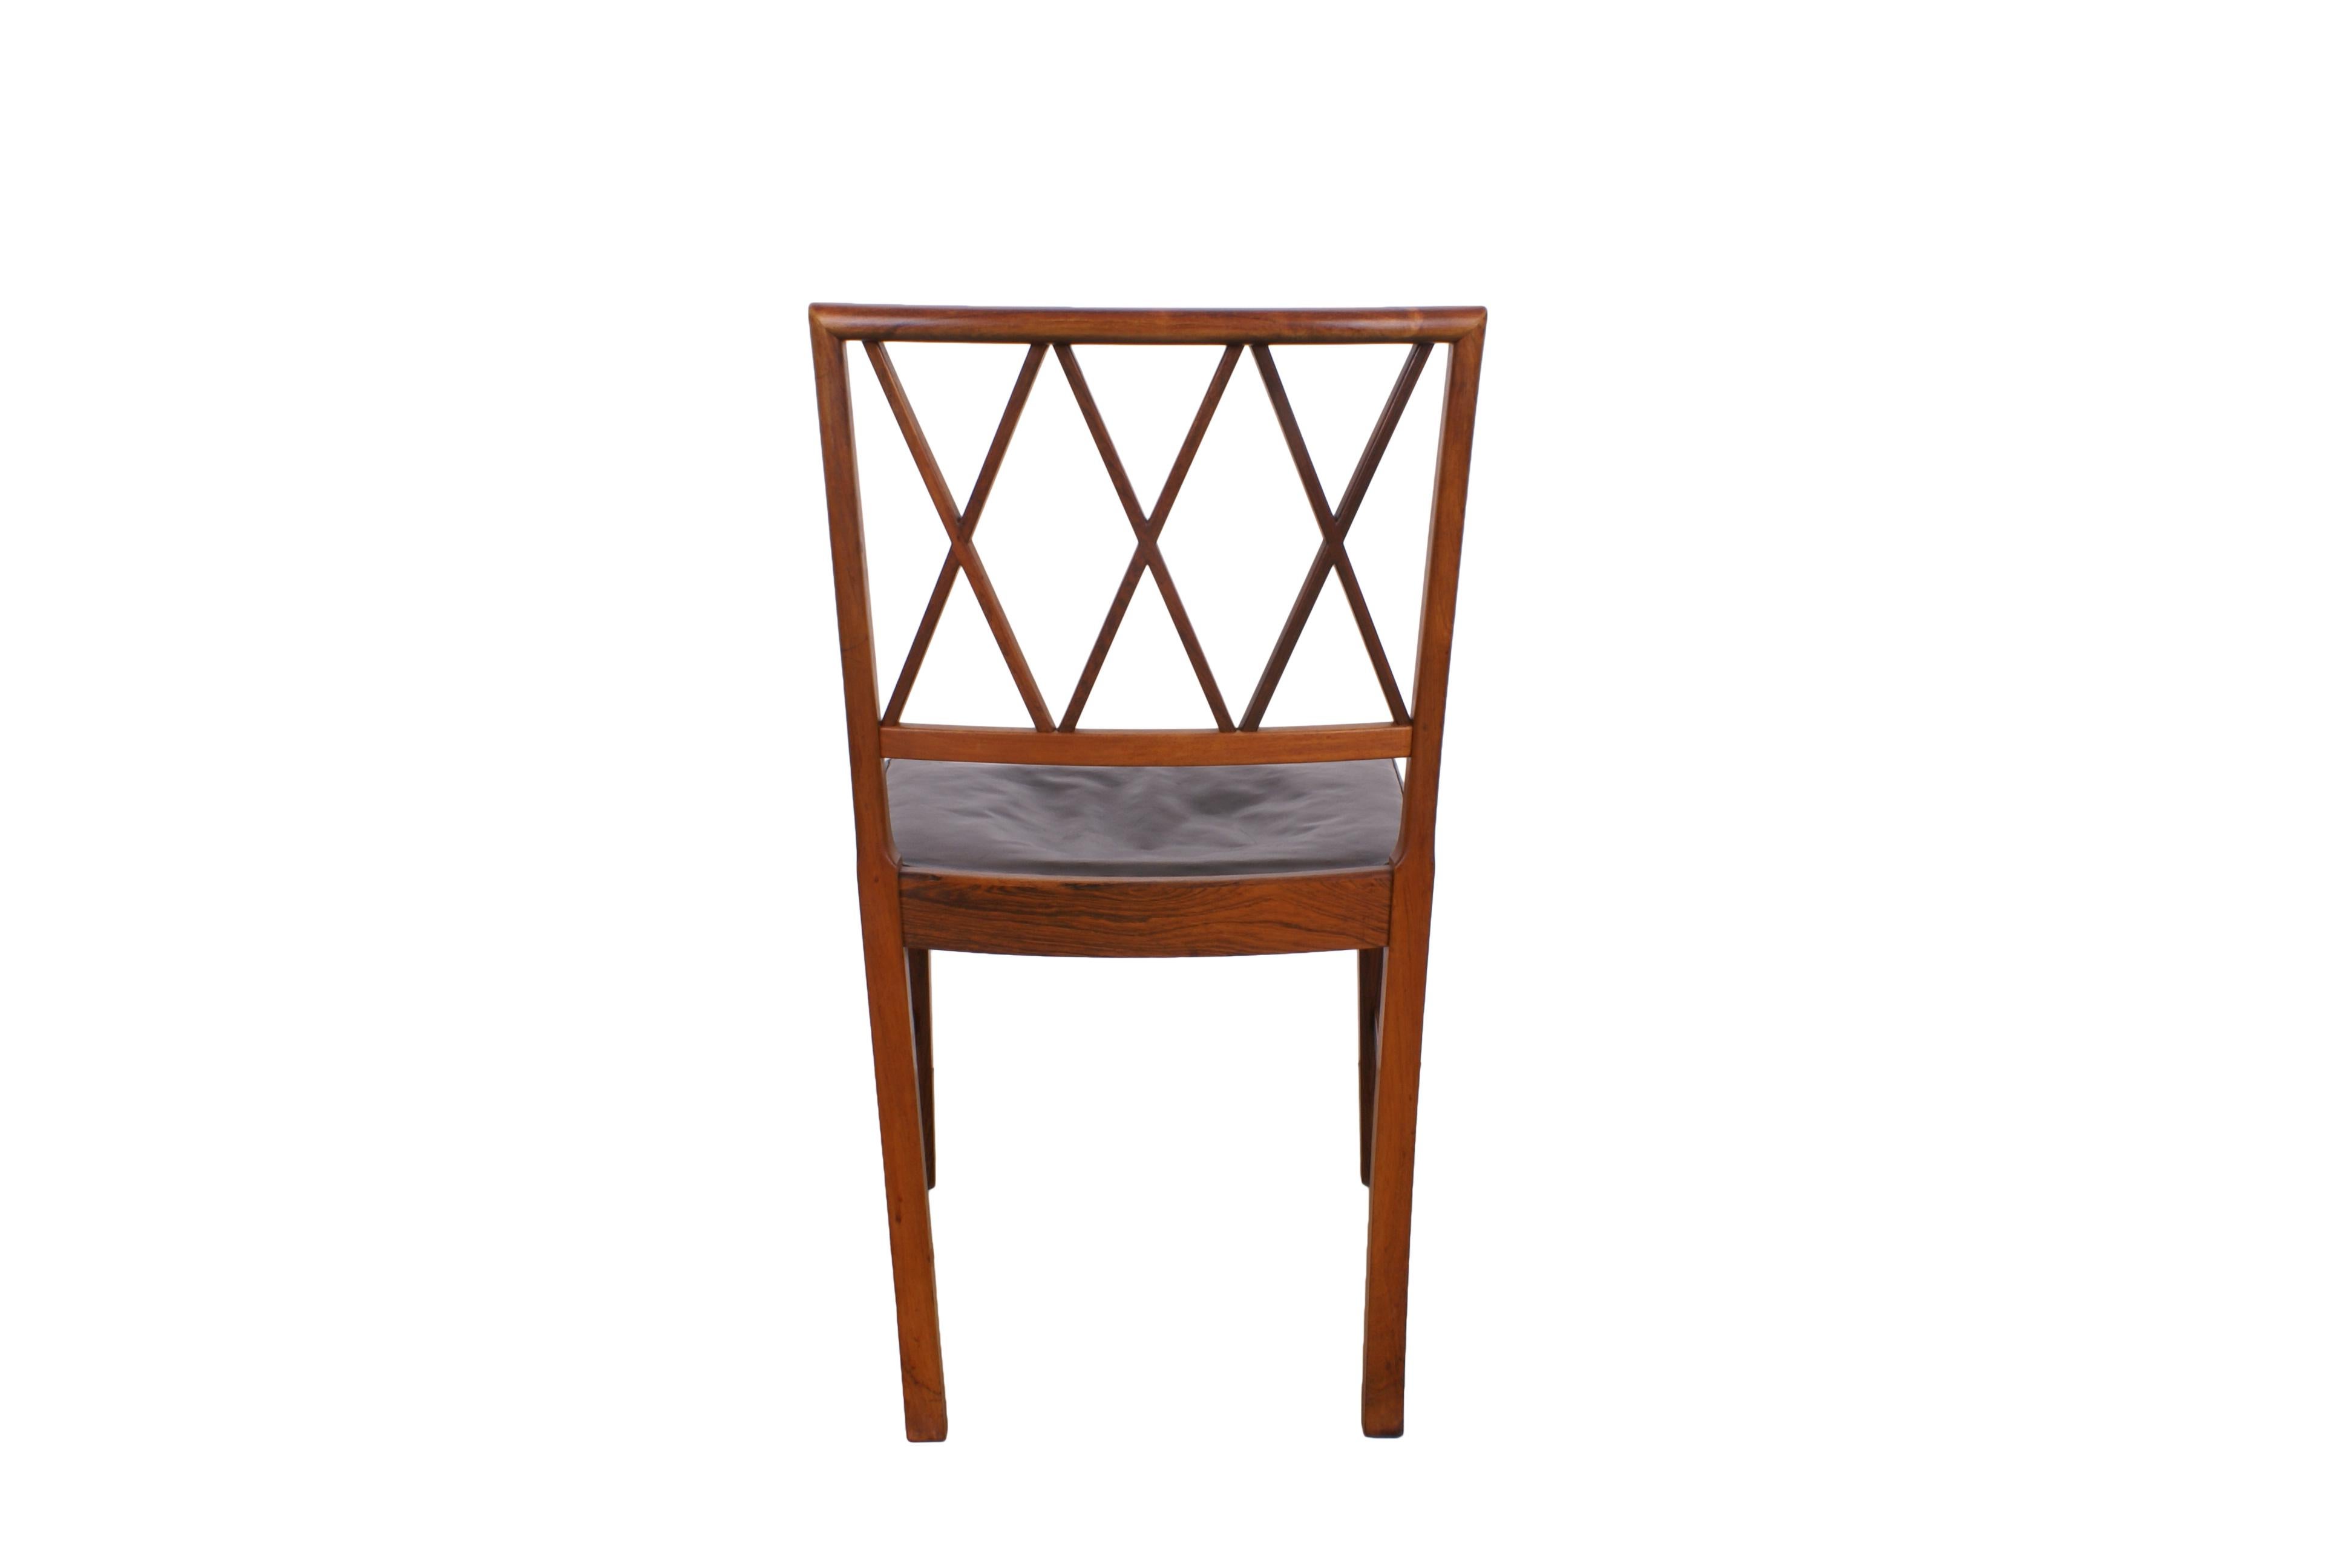 Danish Ole Wanscher Set of 8 Dining Chairs, Rosewood by Cabinetmaker A.J. Iversen, 1942